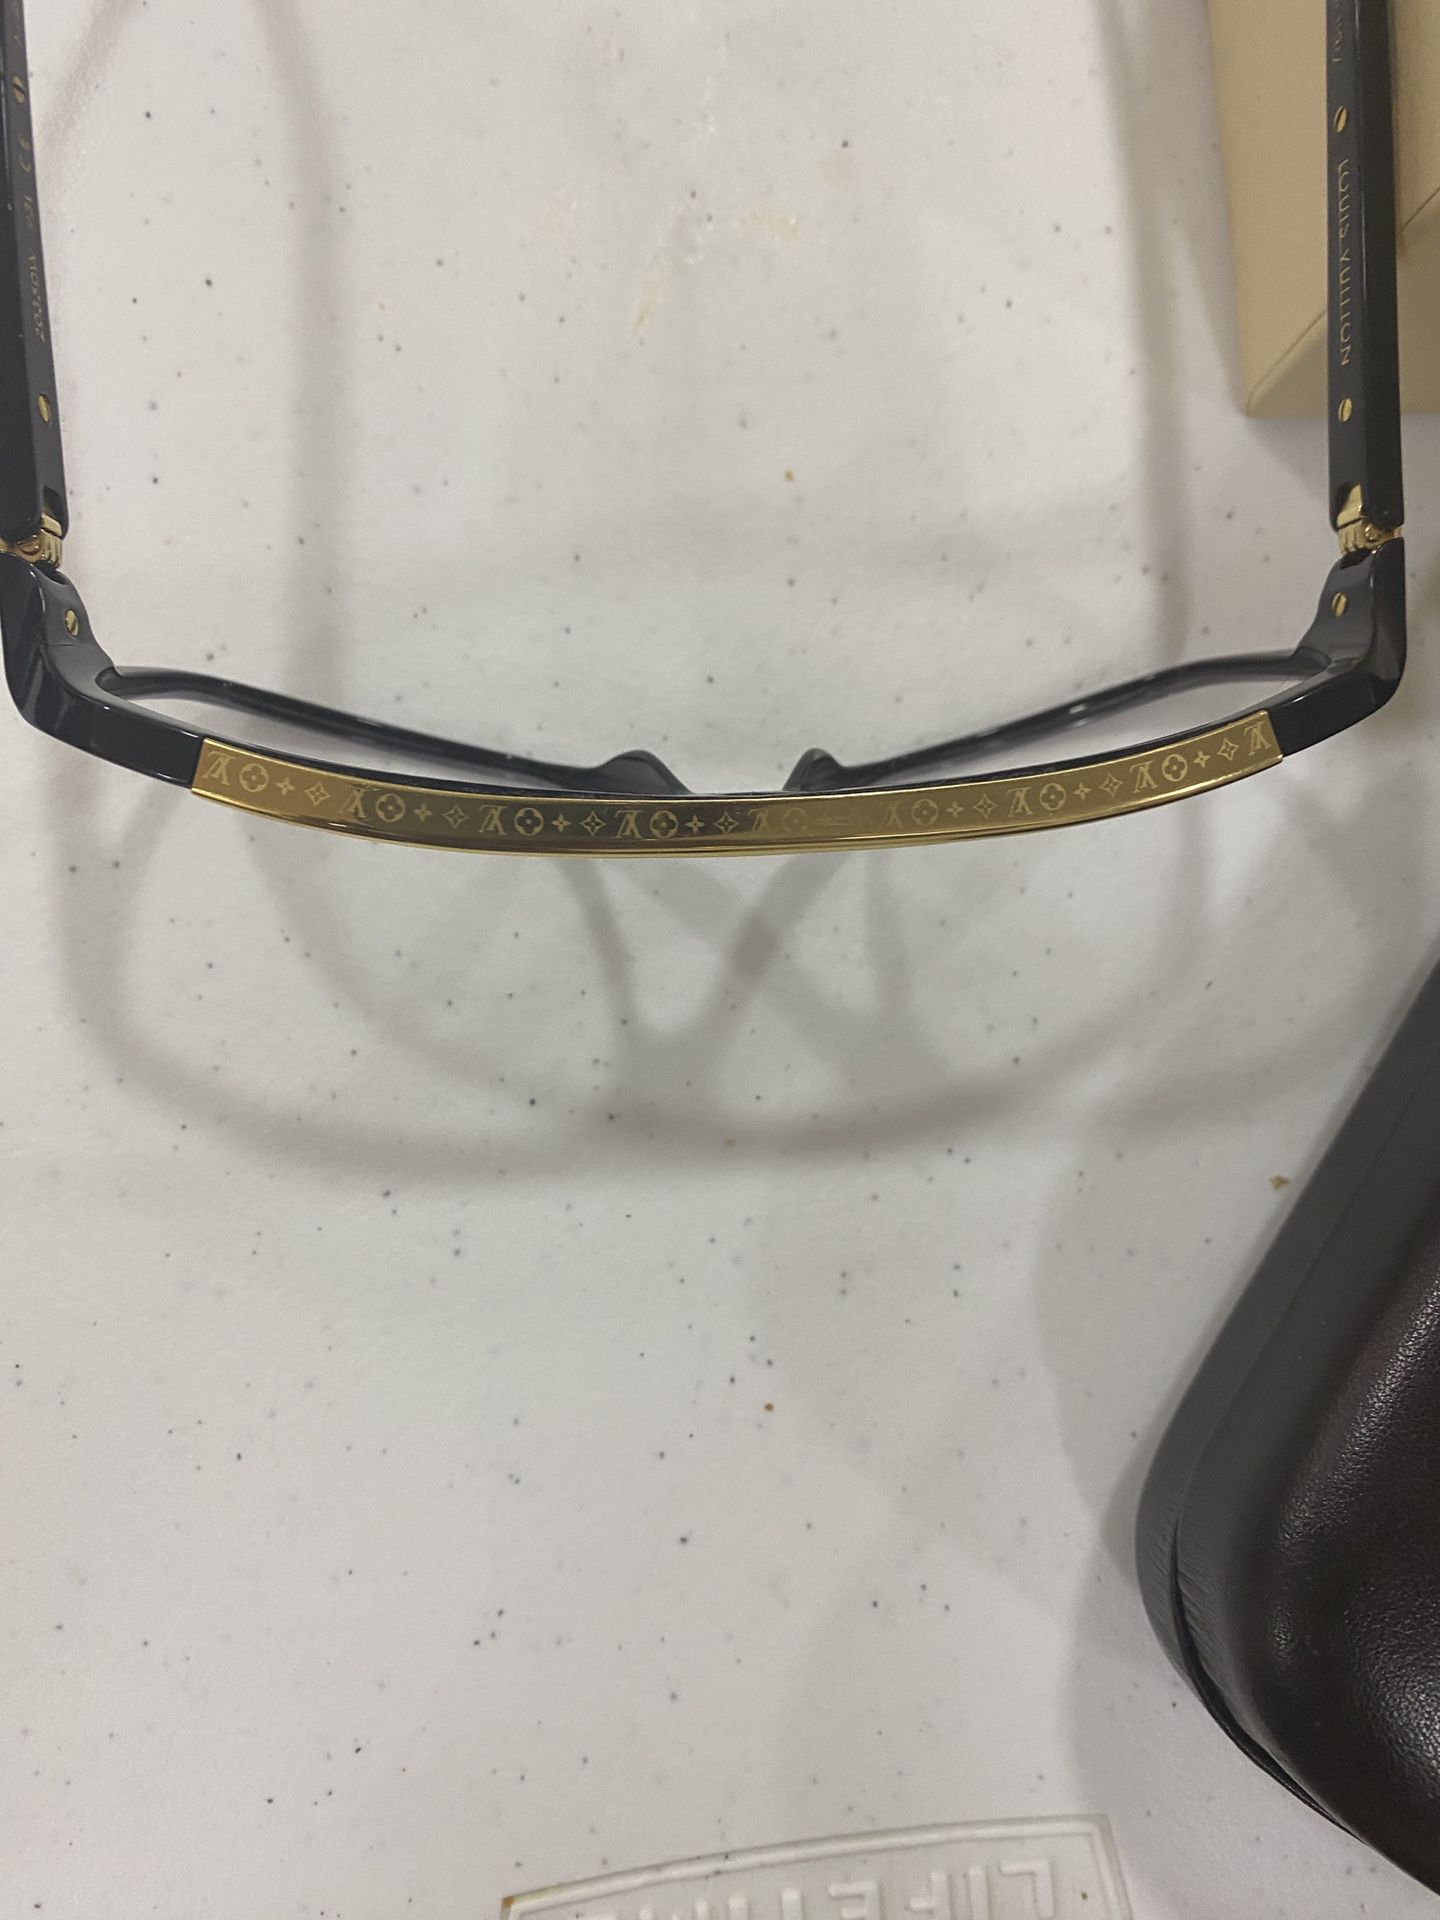 Louis Vuitton Evidence Sunglasses for Sale in Bronx, NY - OfferUp